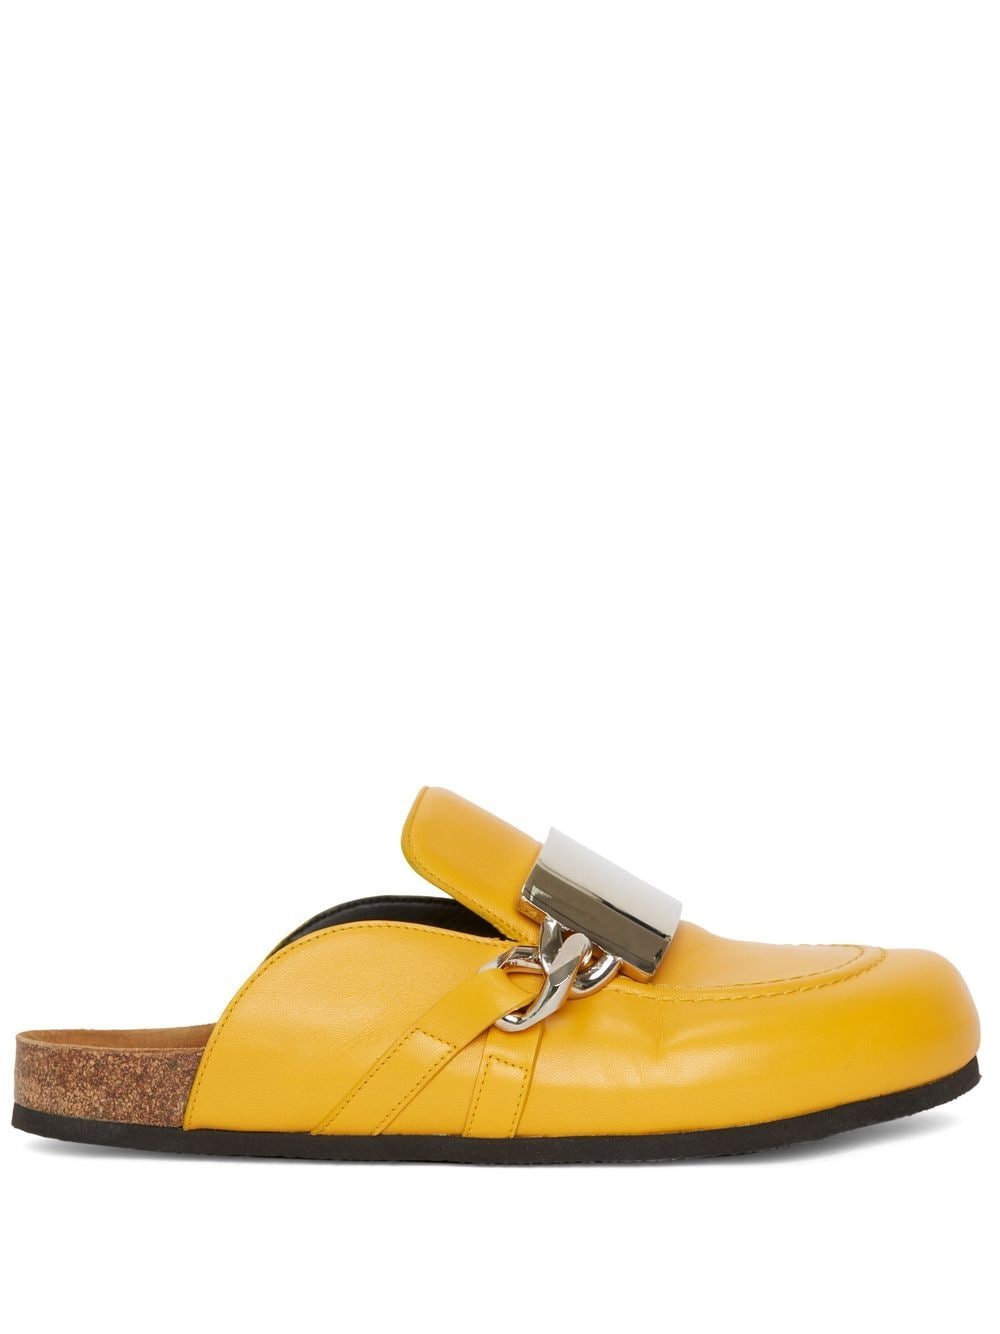 JW Anderson Chain leather mules - Yellow